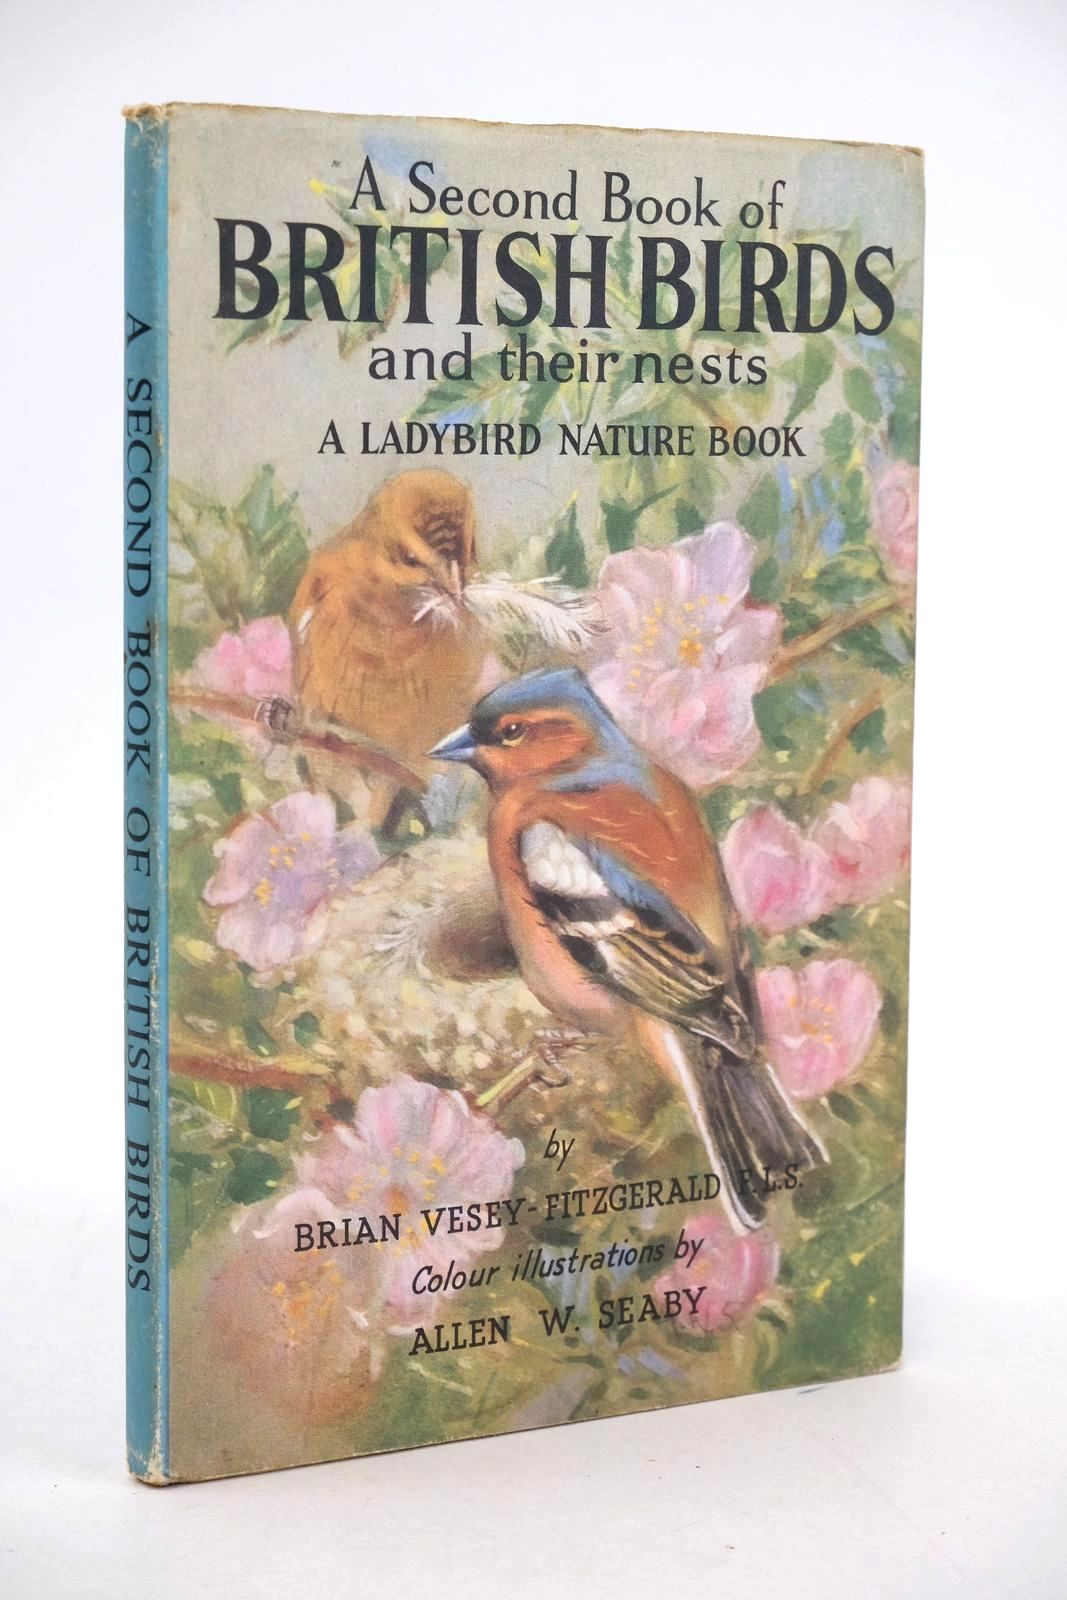 Photo of A SECOND BOOK OF BRITISH BIRDS AND THEIR NESTS written by Vesey-Fitzgerald, Brian illustrated by Seaby, Allen W. published by Wills &amp; Hepworth Ltd. (STOCK CODE: 1327891)  for sale by Stella & Rose's Books